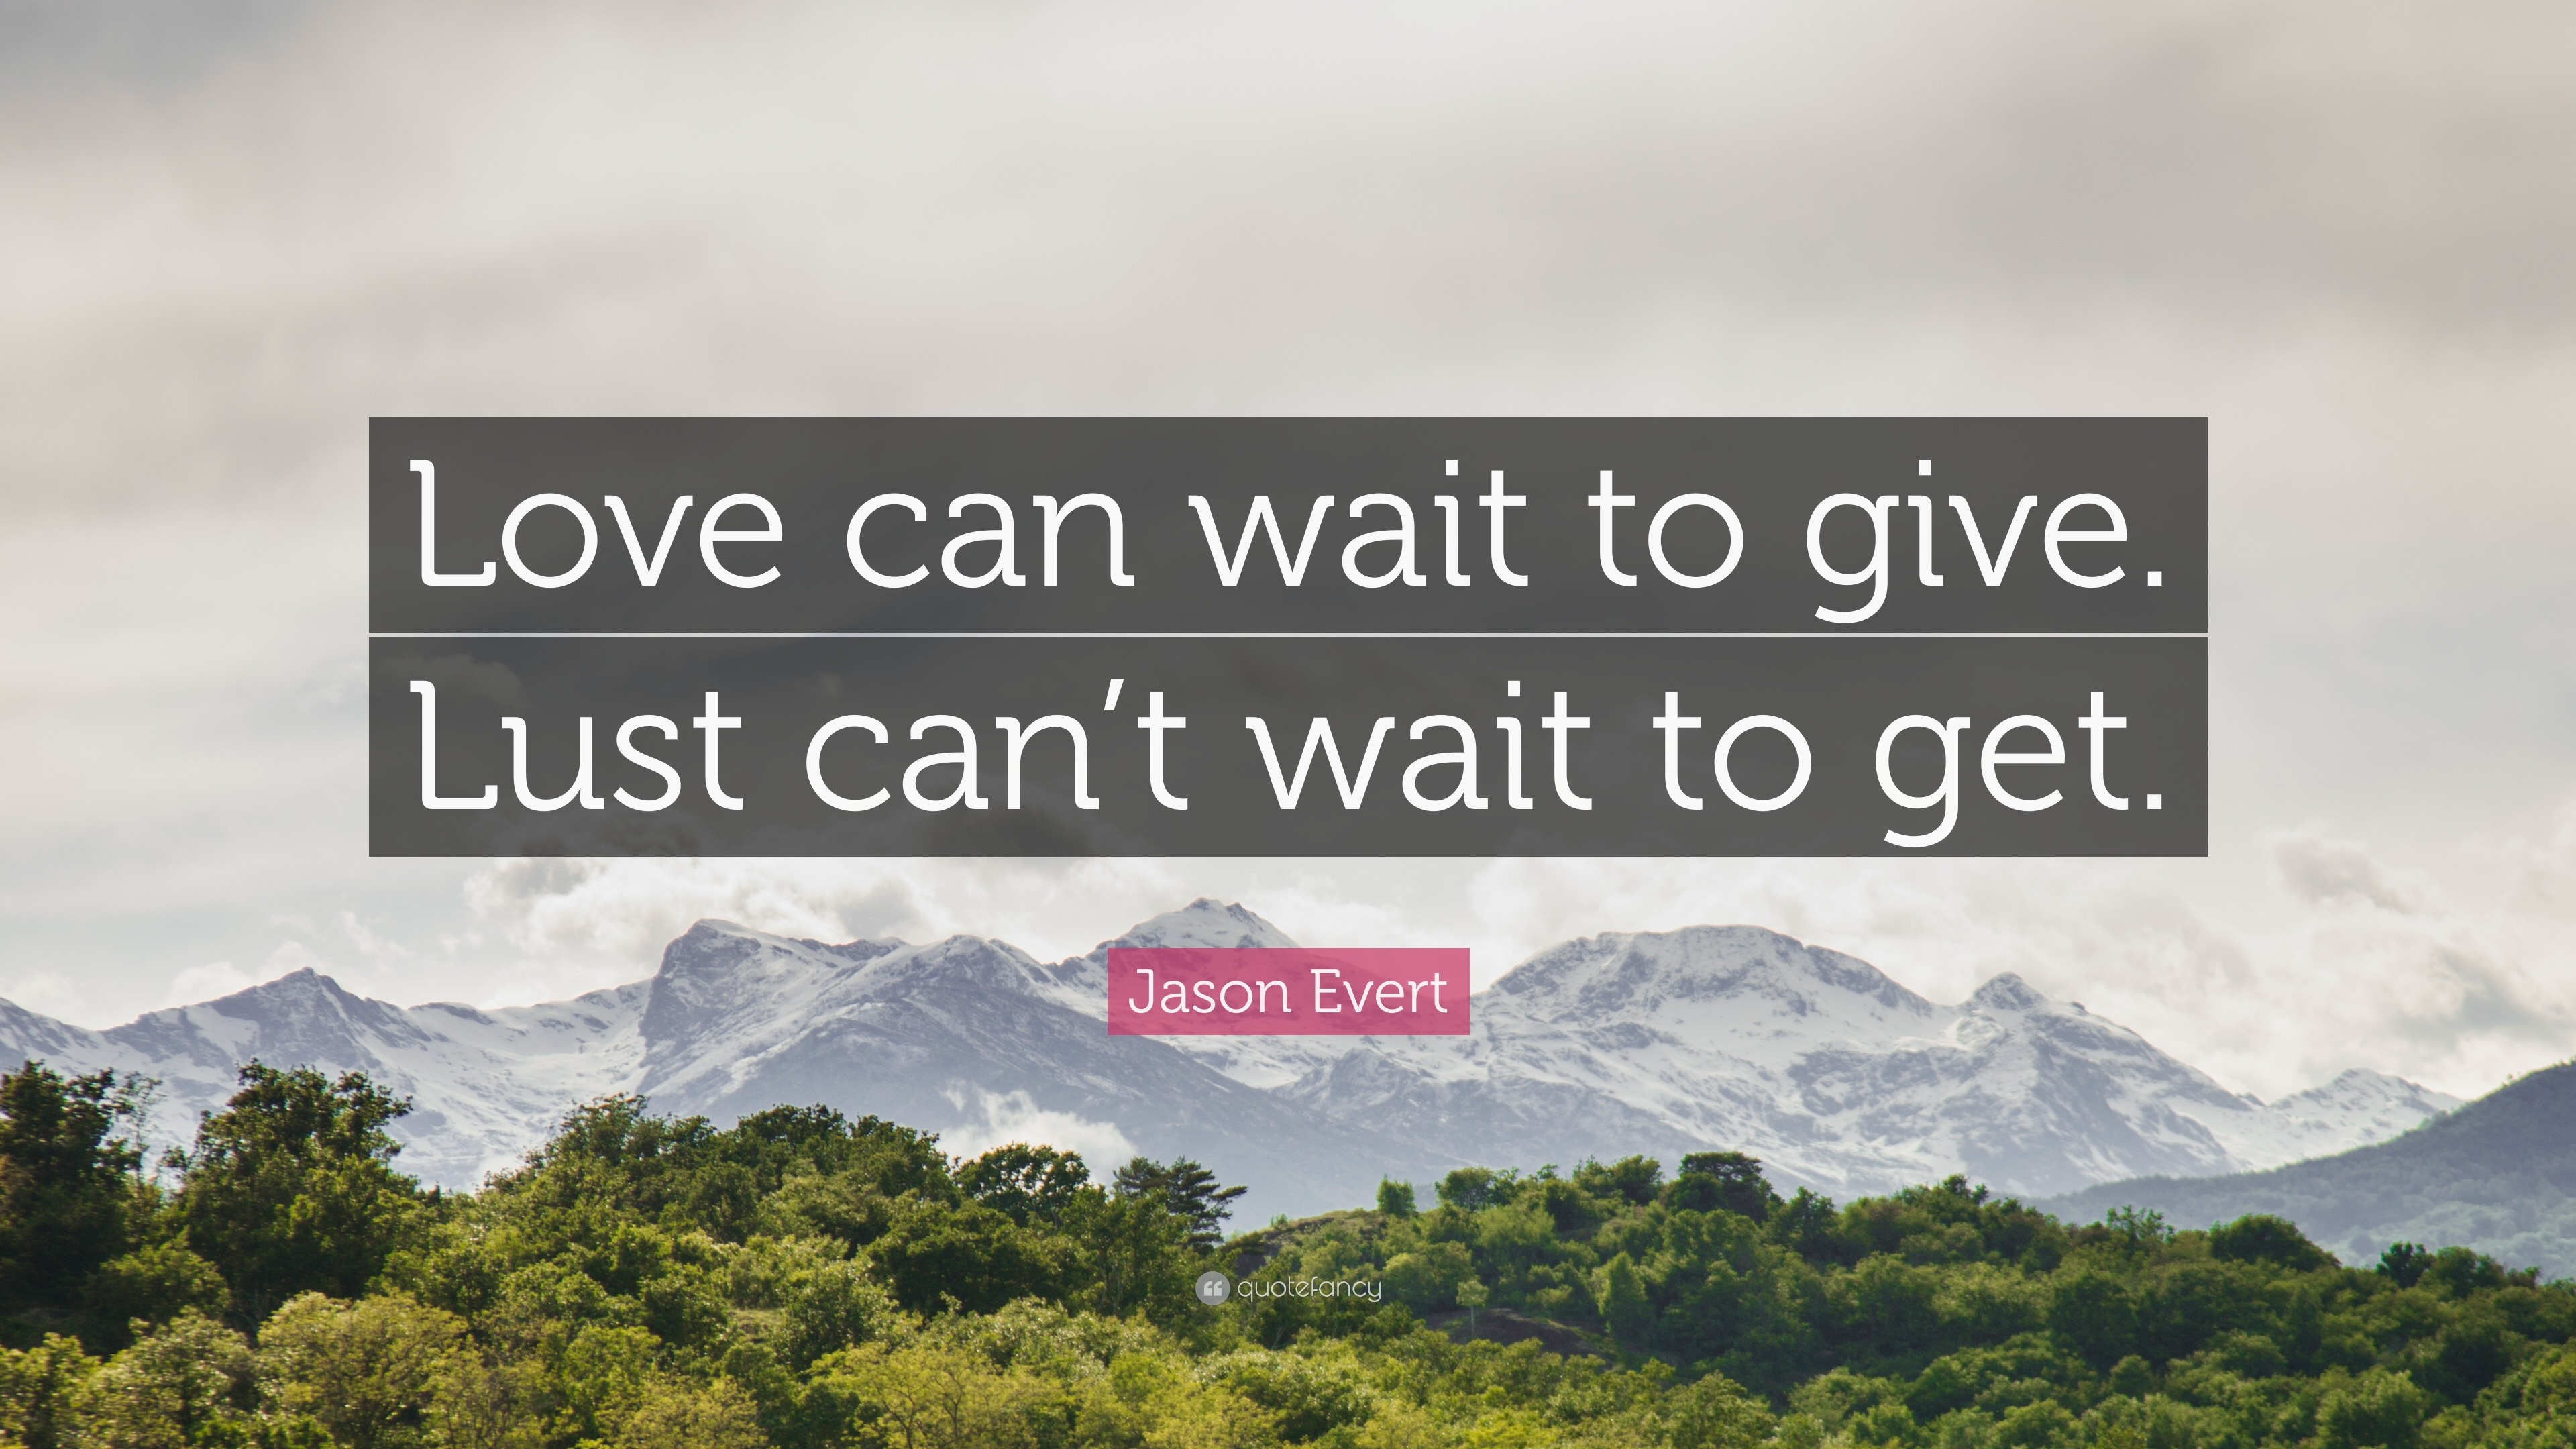 Jason Evert Quote “Love can wait to give Lust can t wait